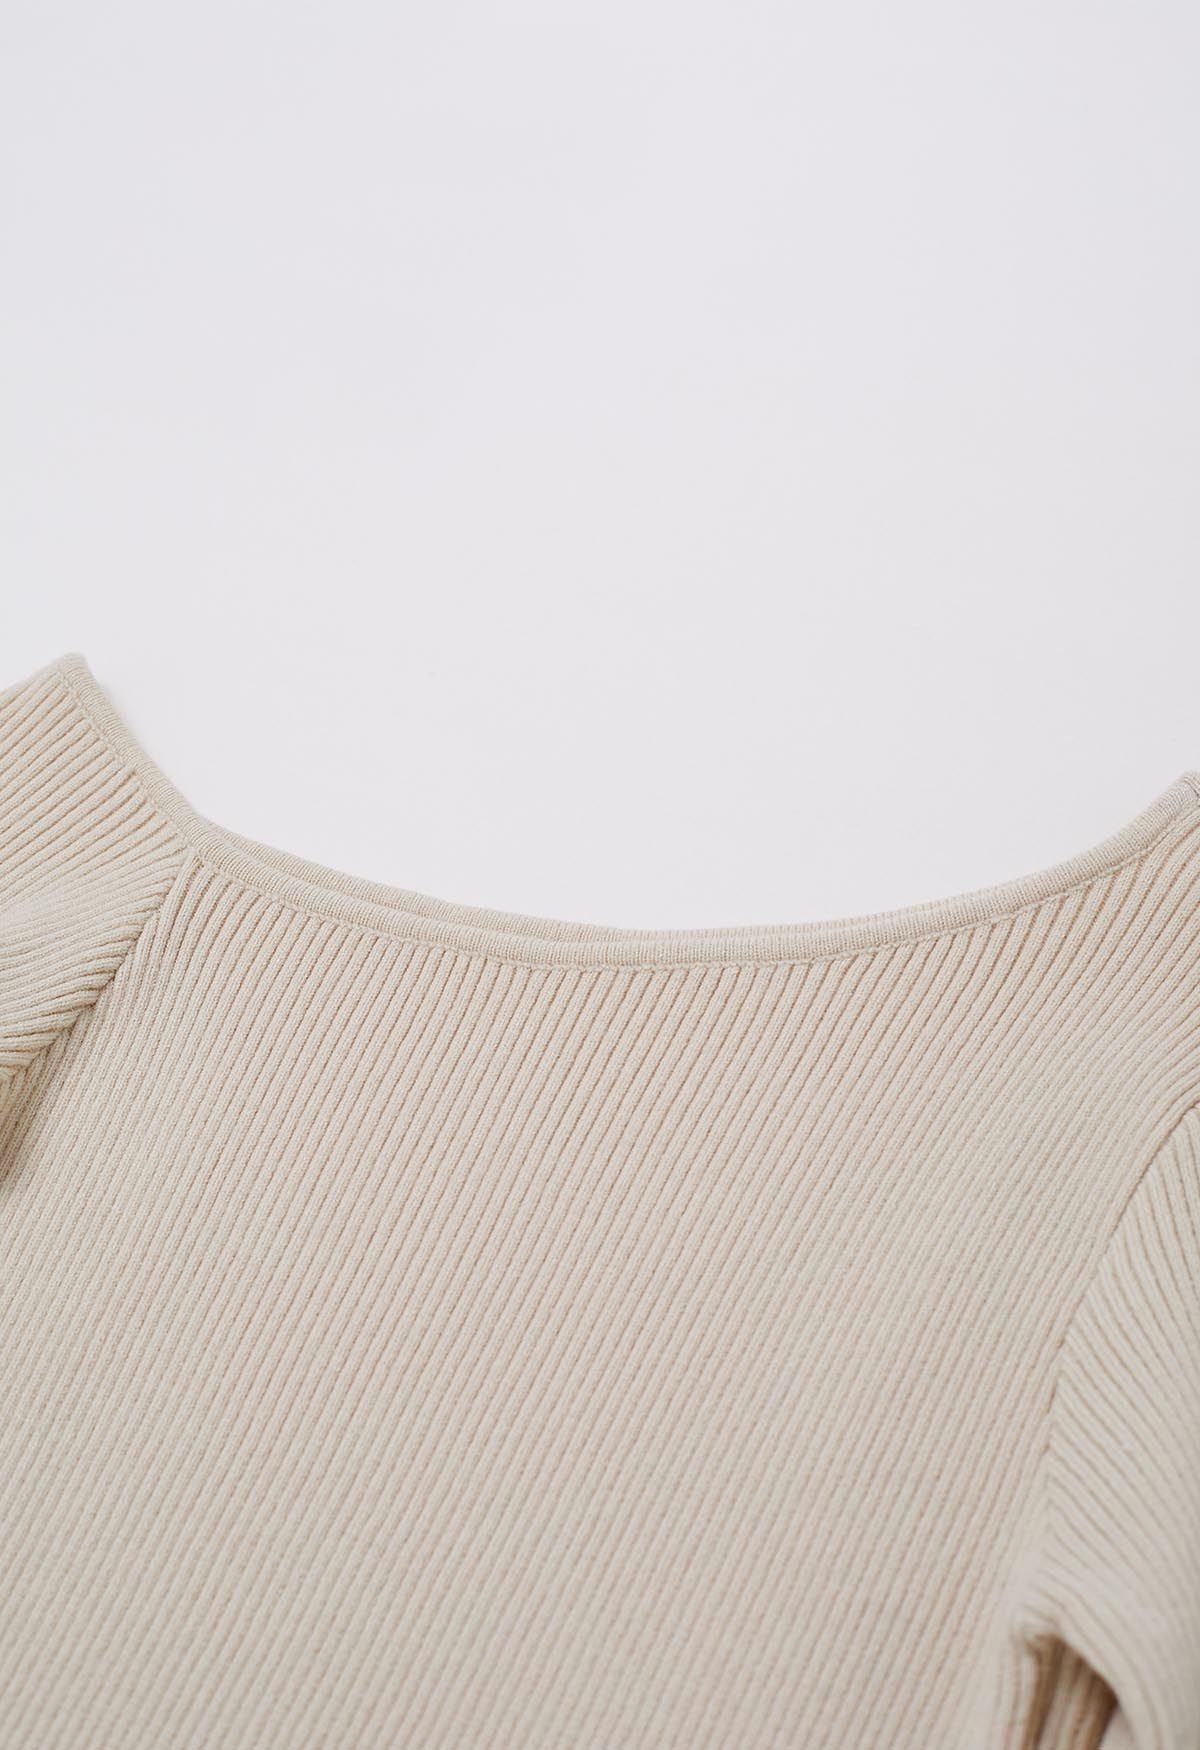 One-Shoulder Feathered Cuffs Knit Top in Cream